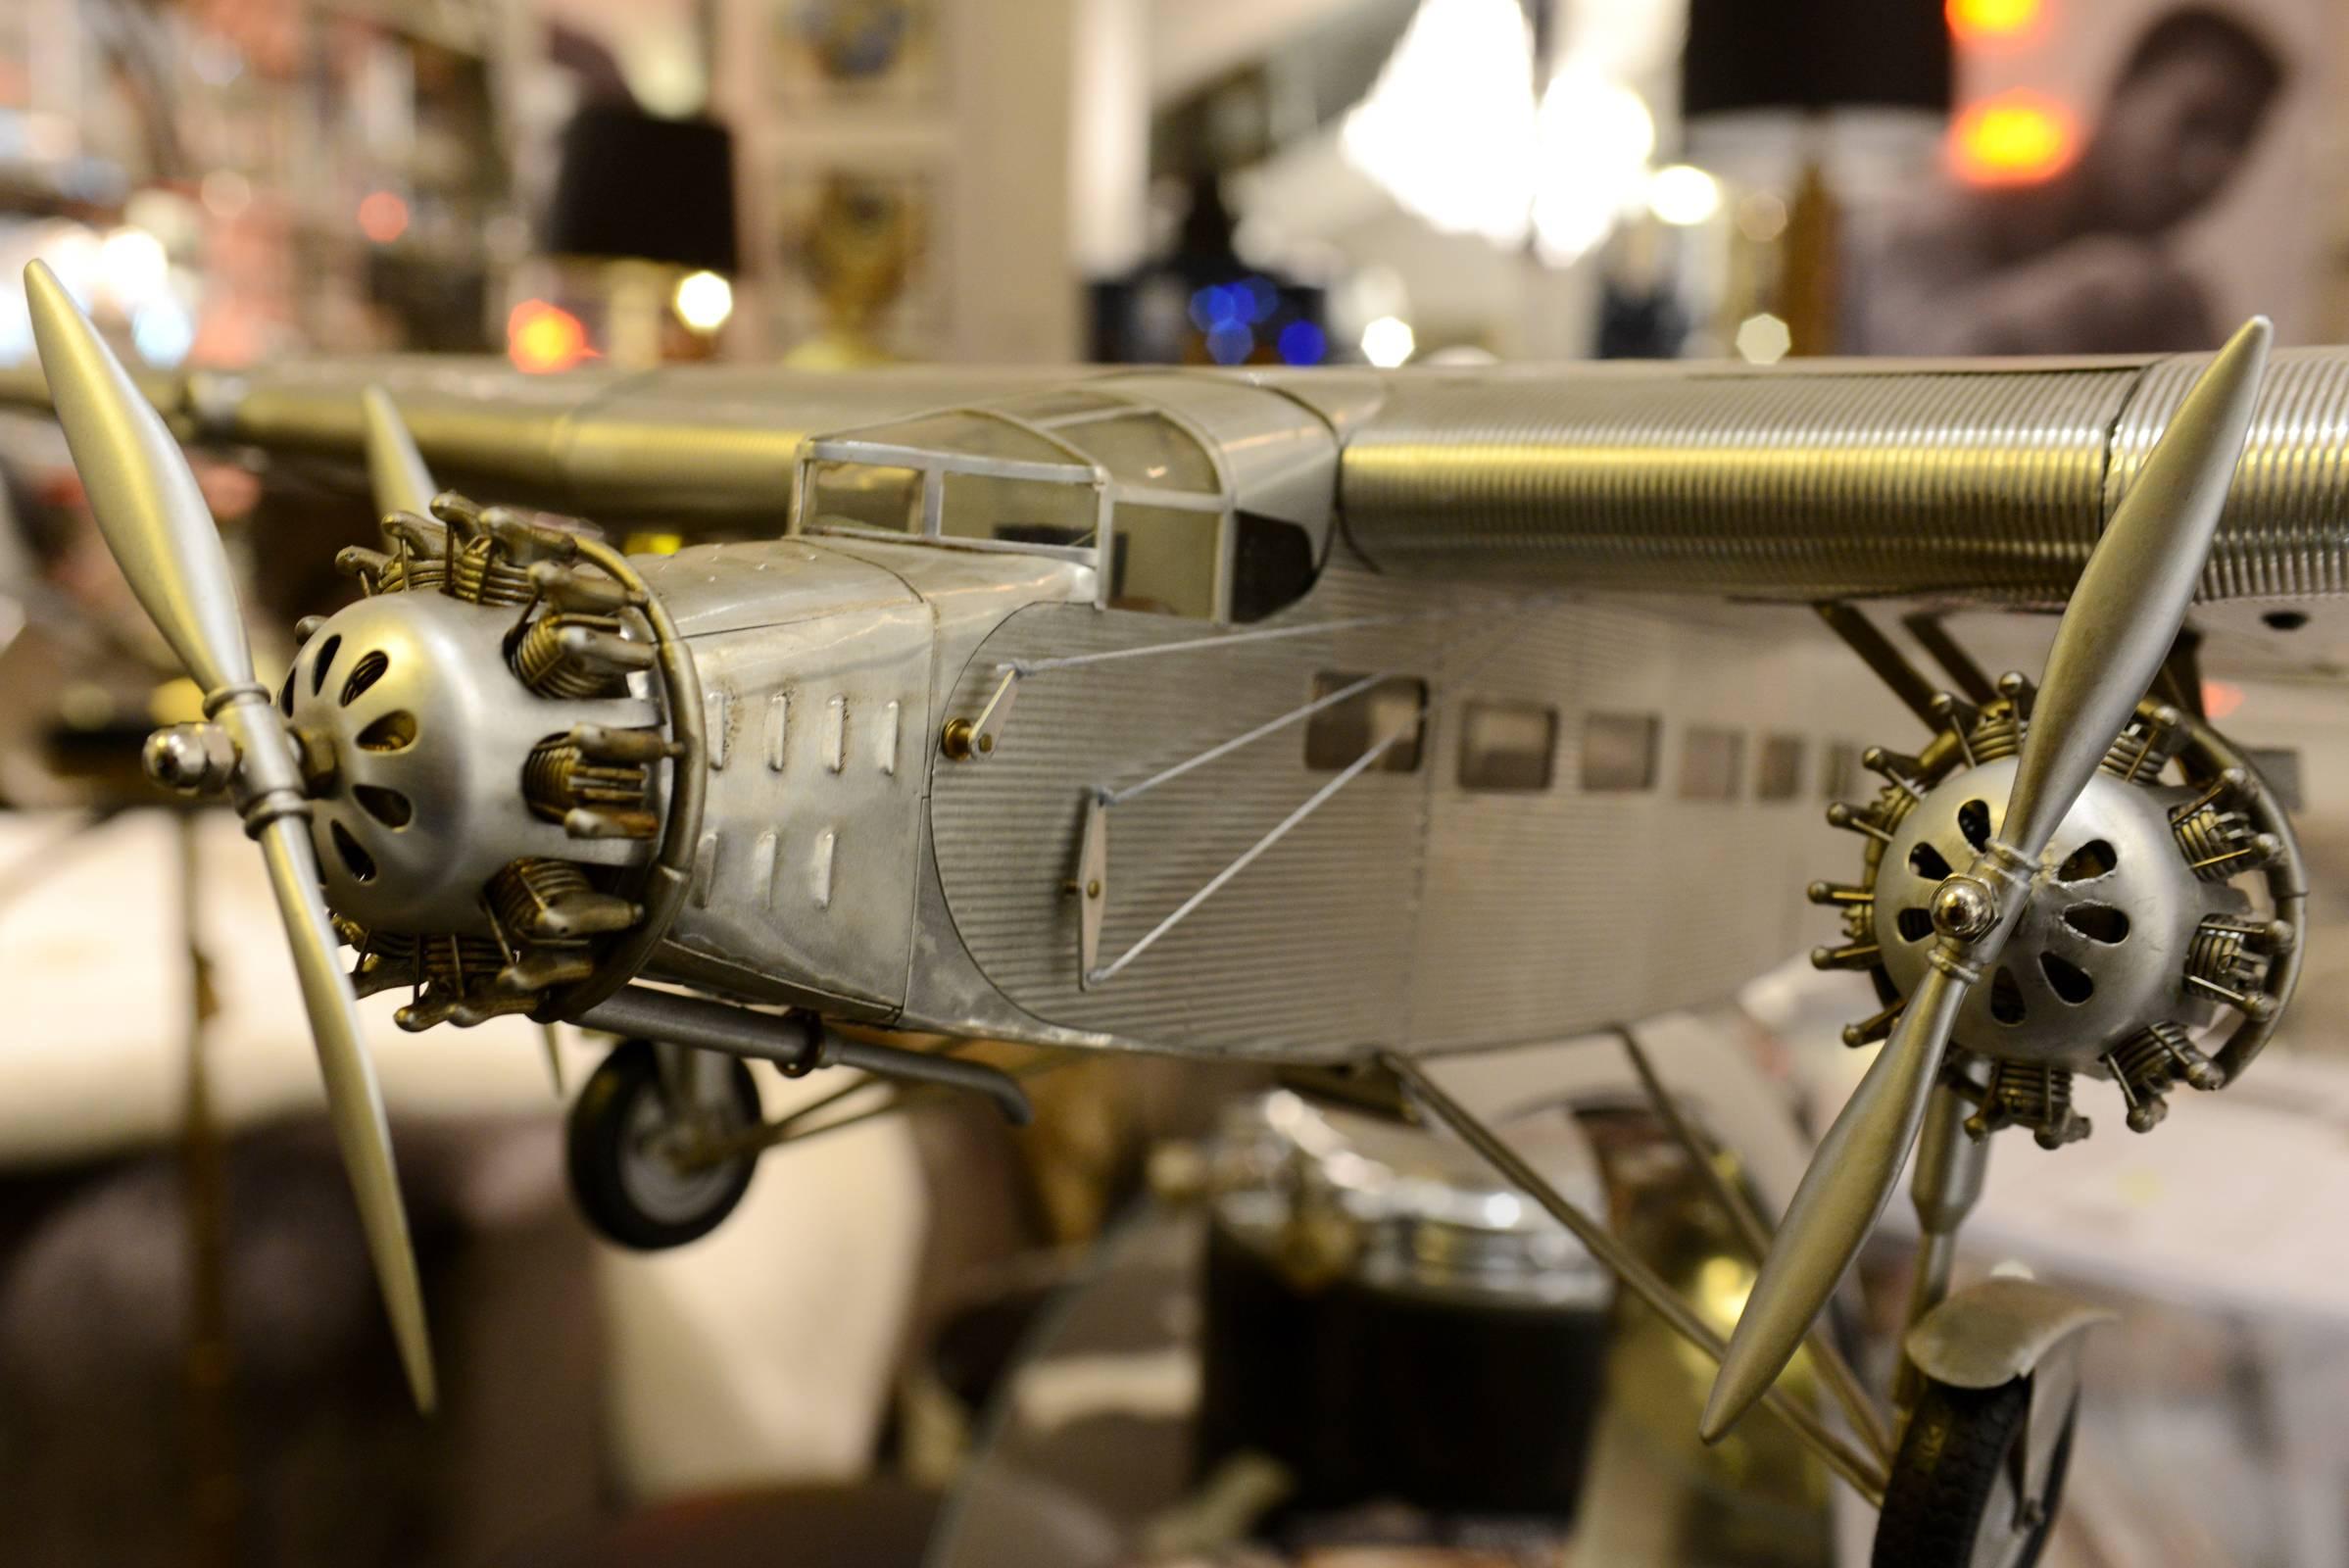 Trimotor aircraft model Ford handcrafted in aluminum.
Manufactured between 1926 and 1933 by Ford's own 
factory. Wingspan: 102cm.
